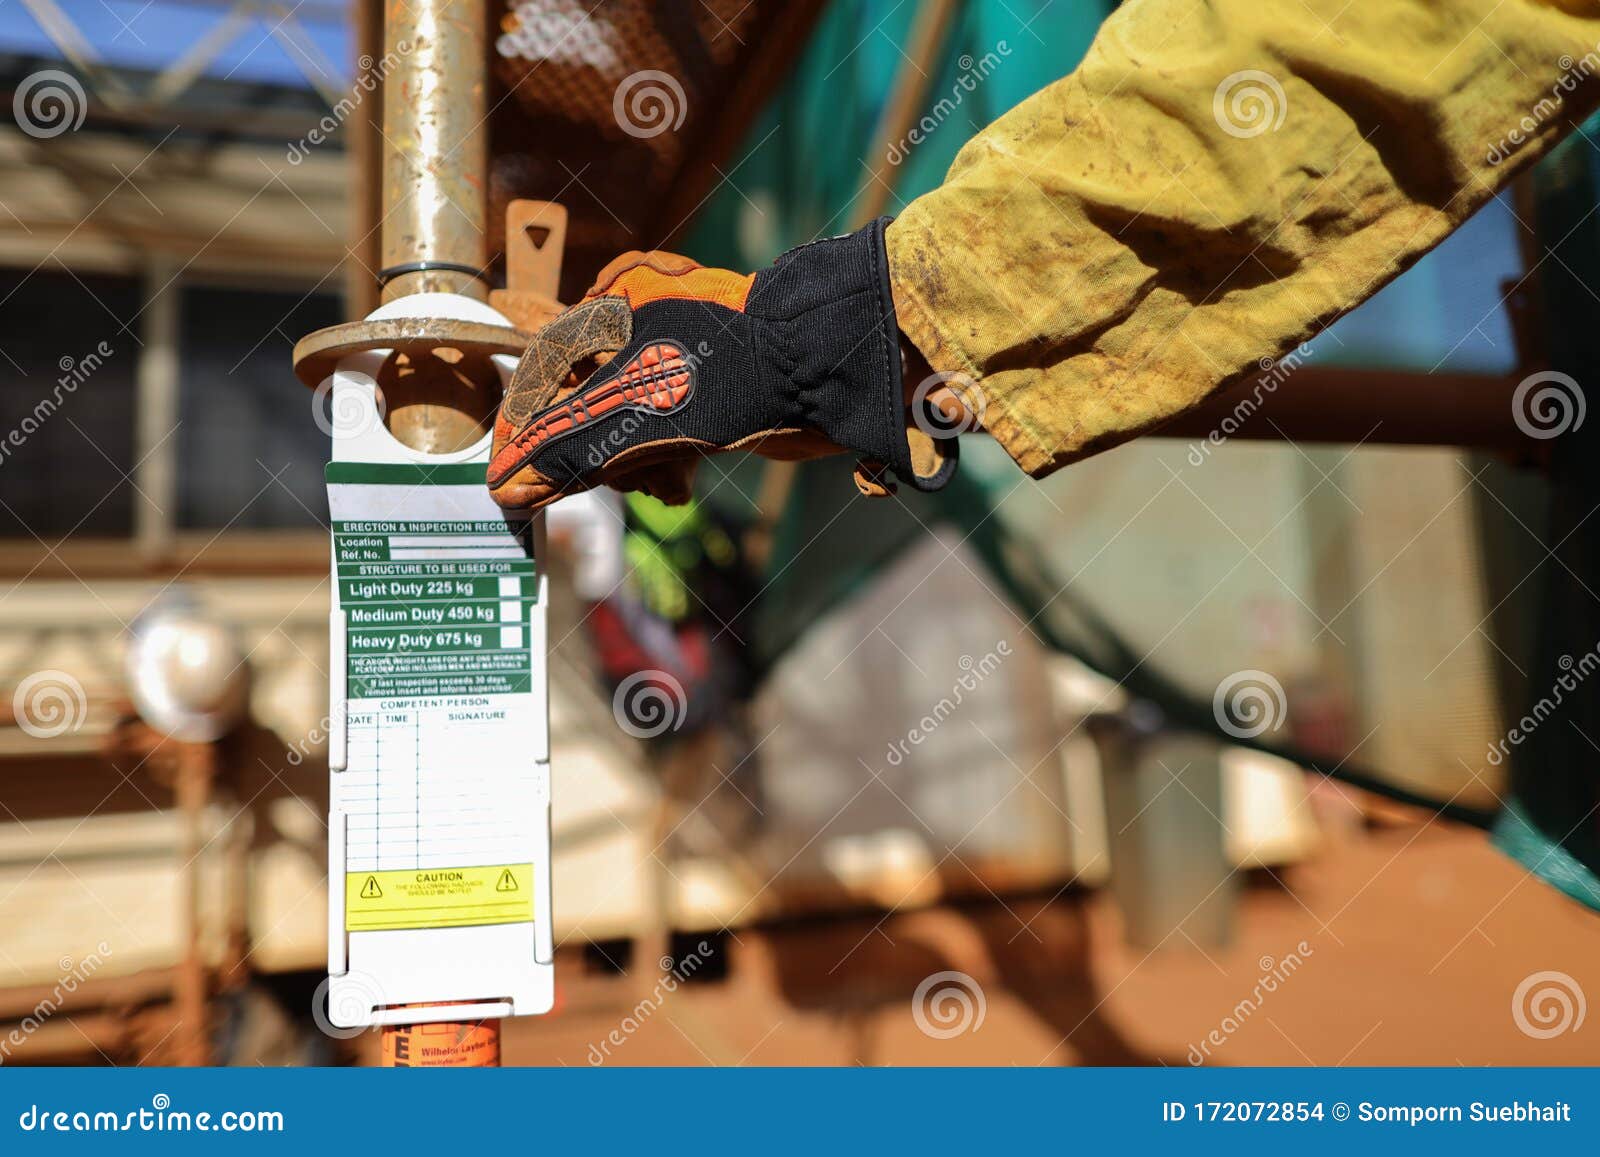 site scaffolder supervisor hand wearing safety cs5 glove protection inspecting scaffolding tag label on standing tube